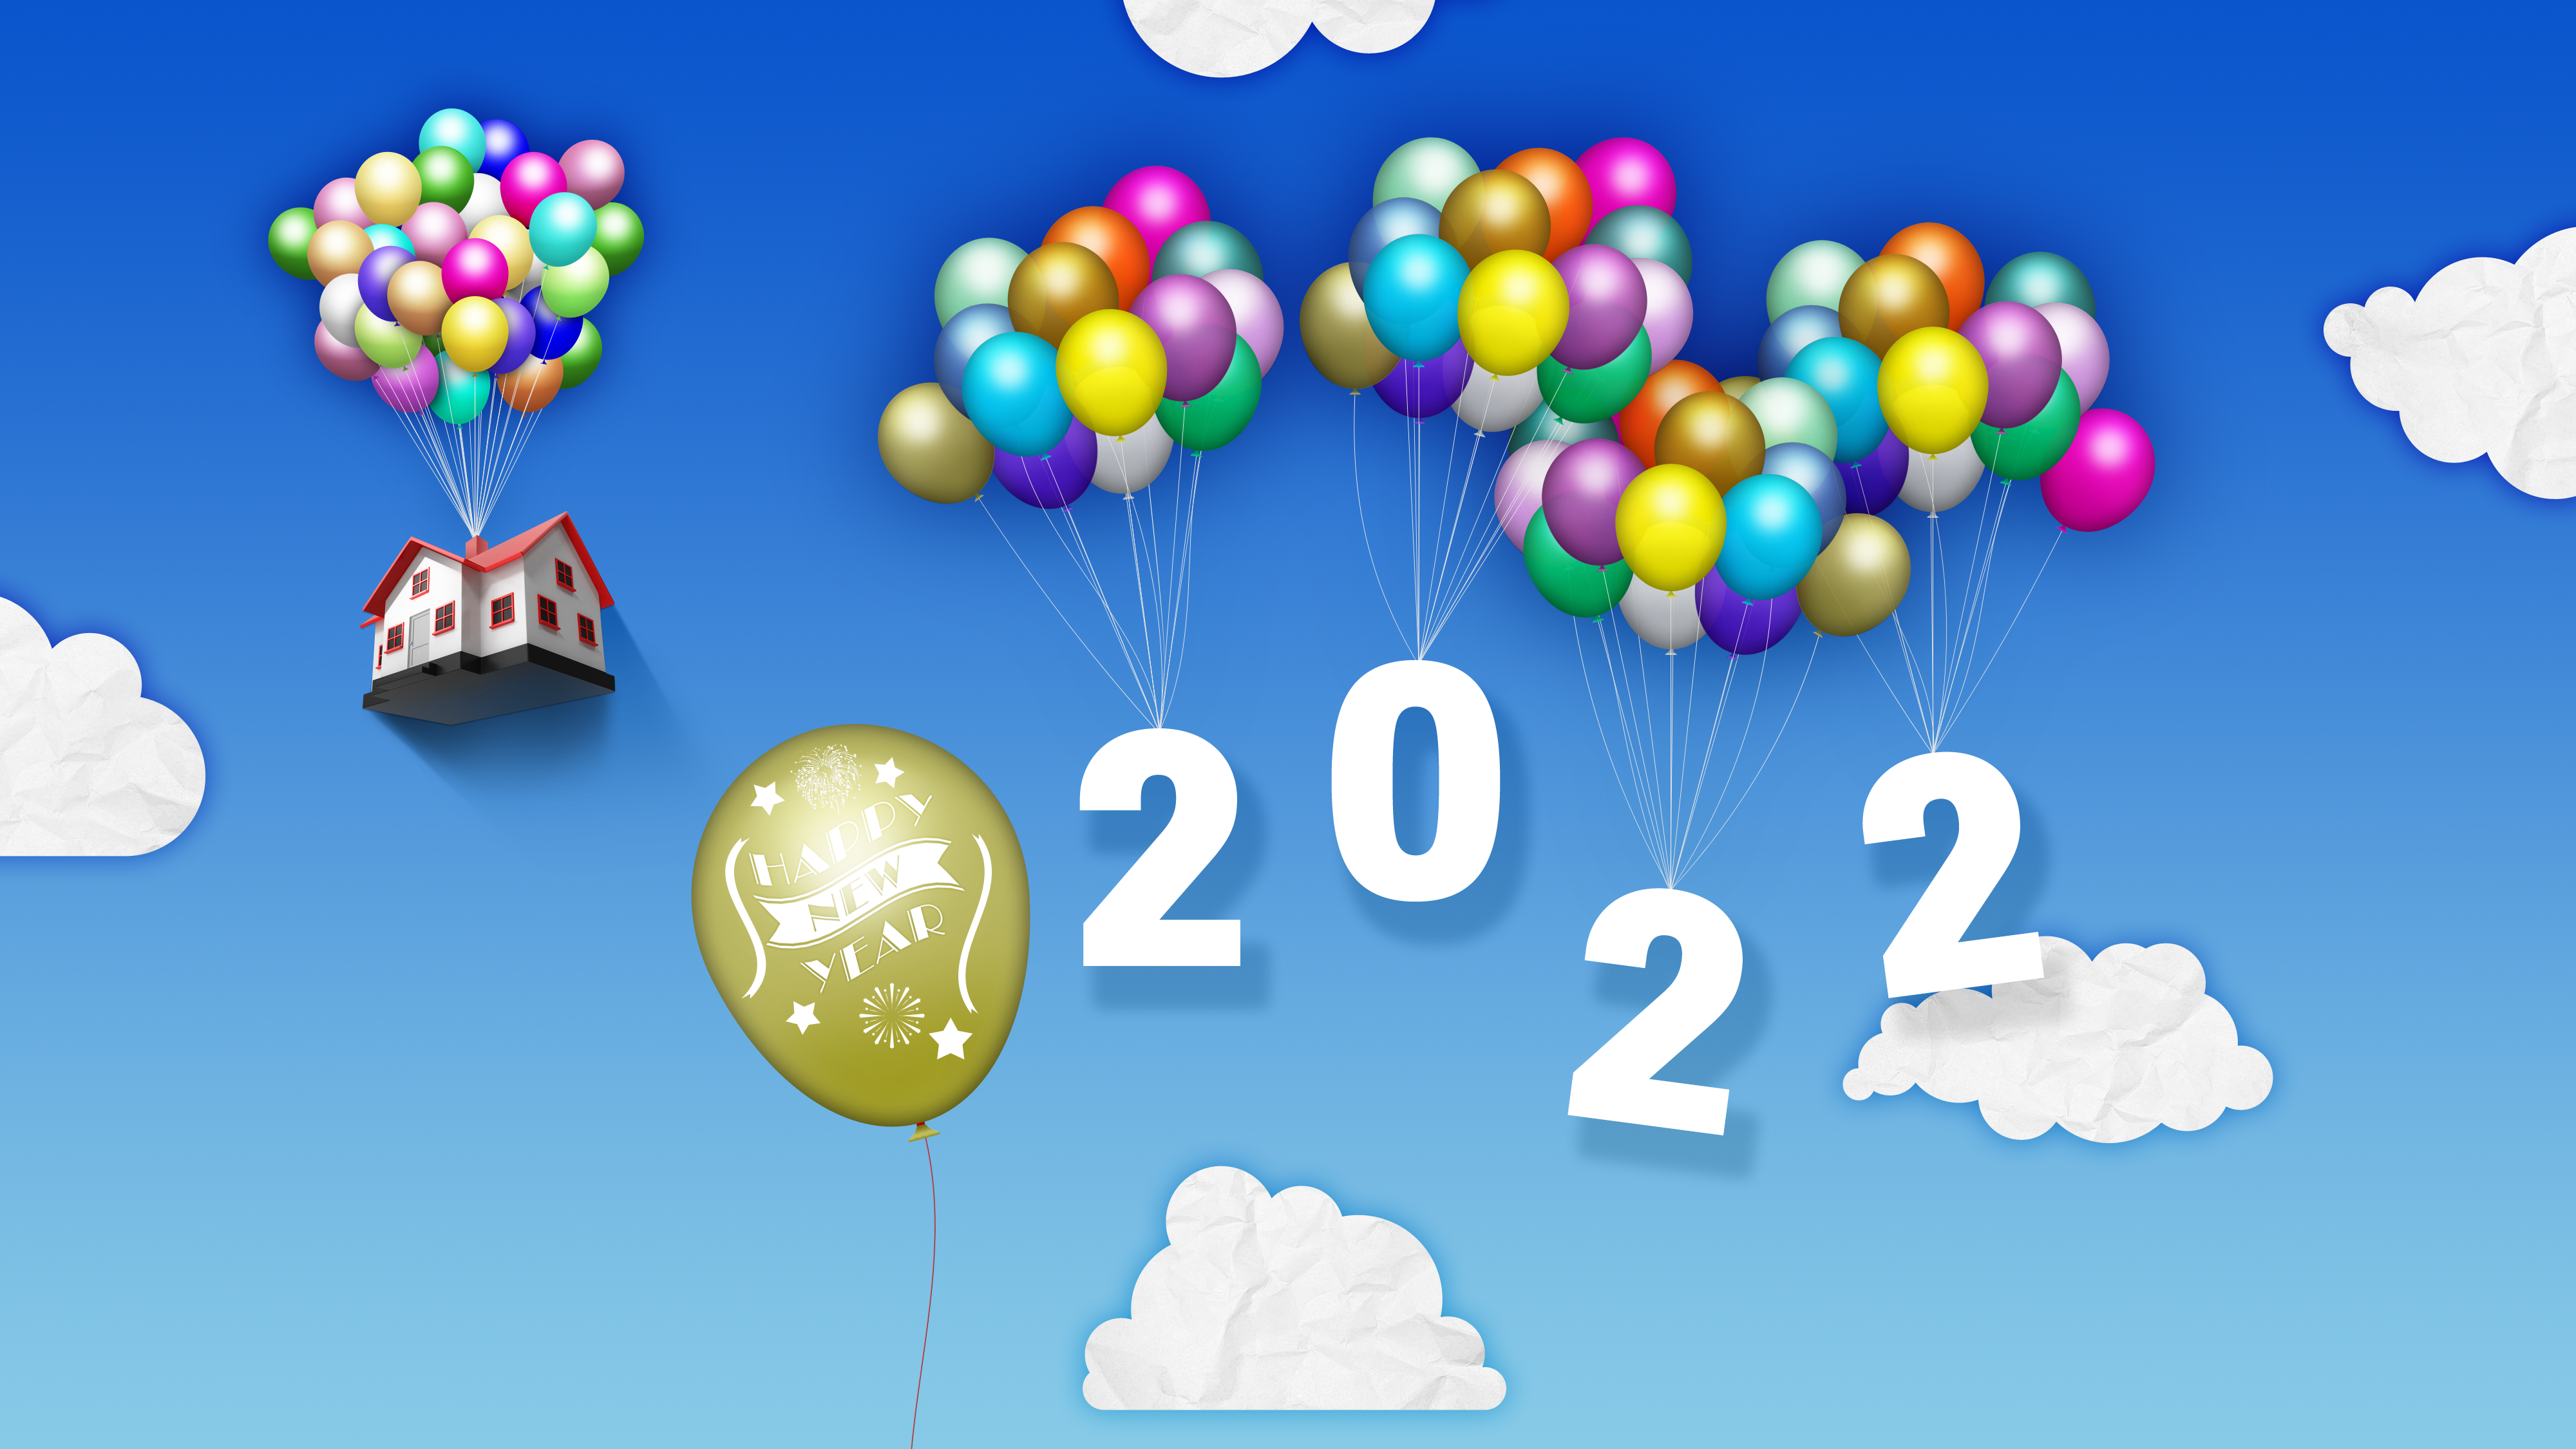 2022 Year Happy New Year Balloon House Sky Clouds 4000x2250